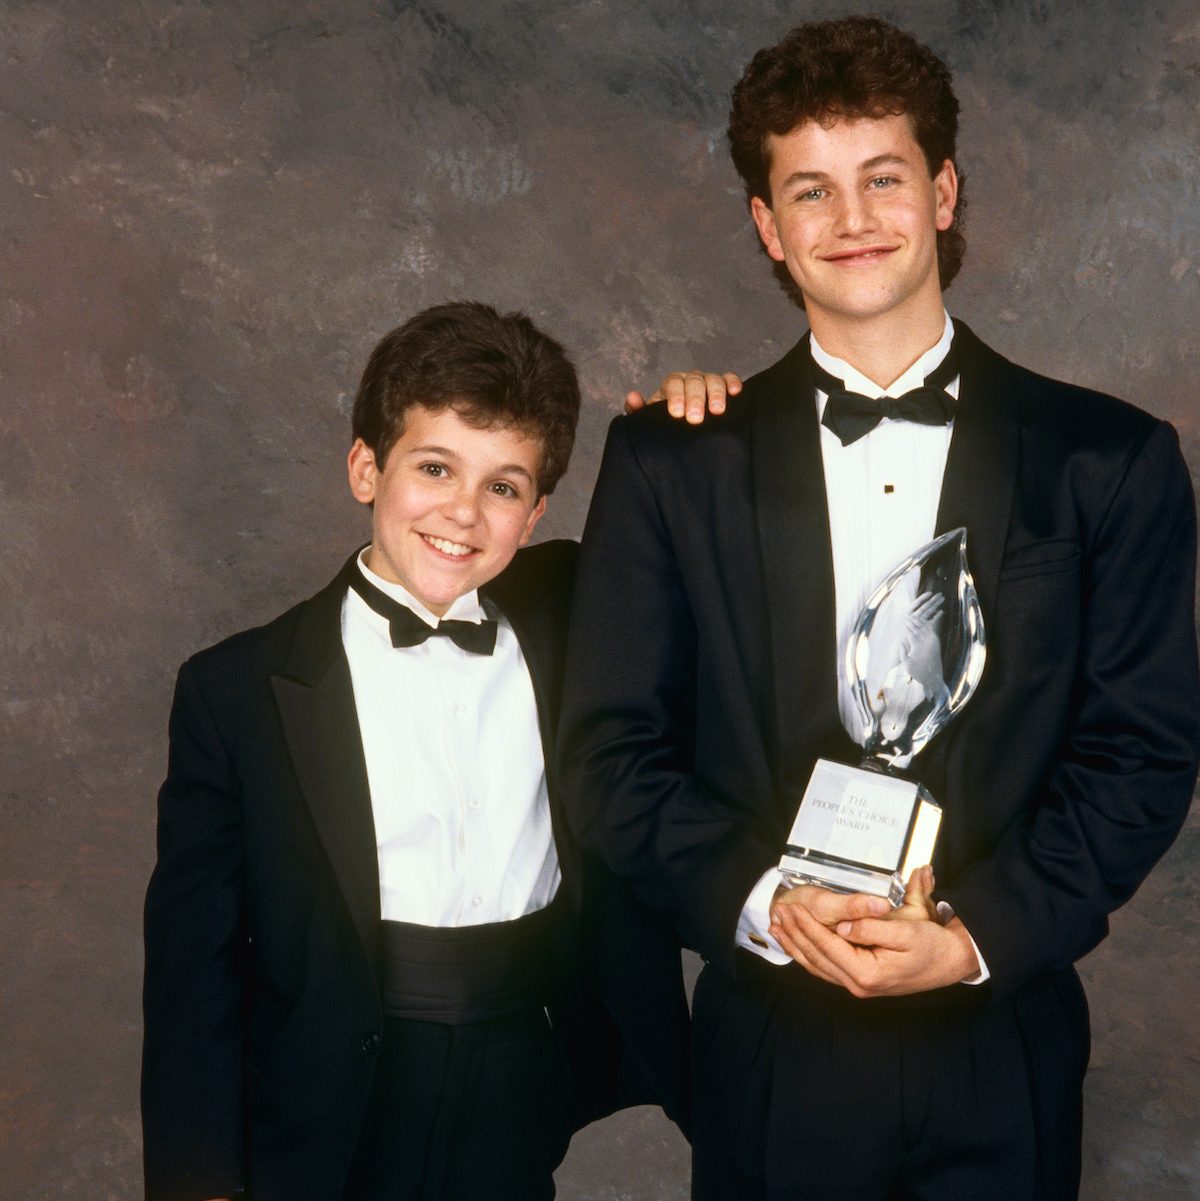 Fred Savage of 'The Wonder Years' and Kirk Cameron of 'Growing Pains' pose with the People's Choice Award, 1989 